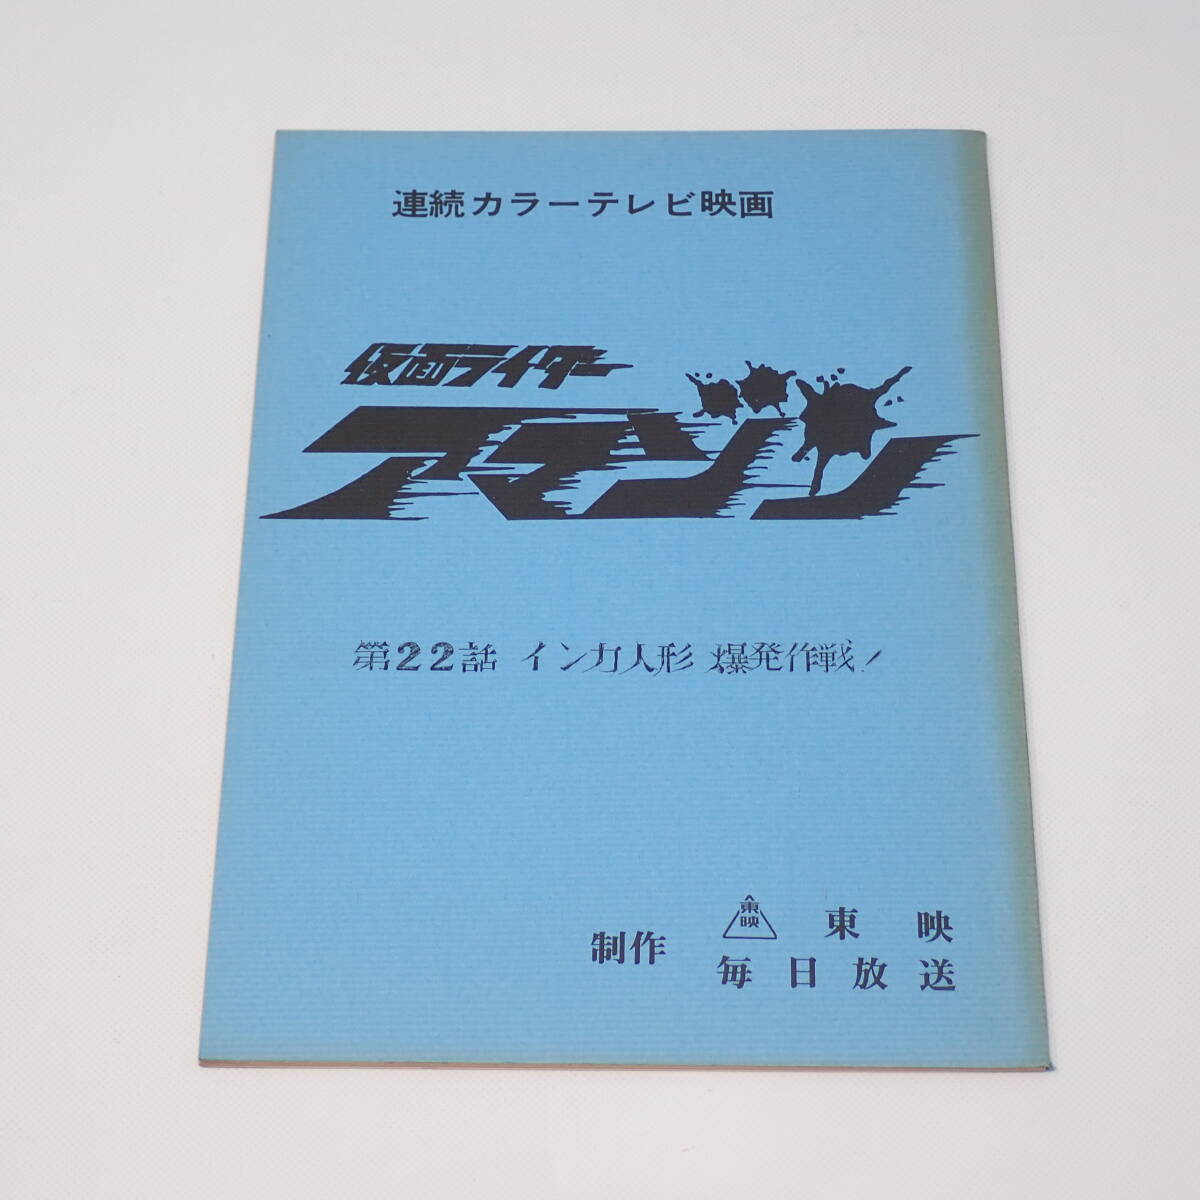  special effects script Kamen Rider Amazon no. 22 story in ka doll . departure military operation! stone forest chapter Taro 